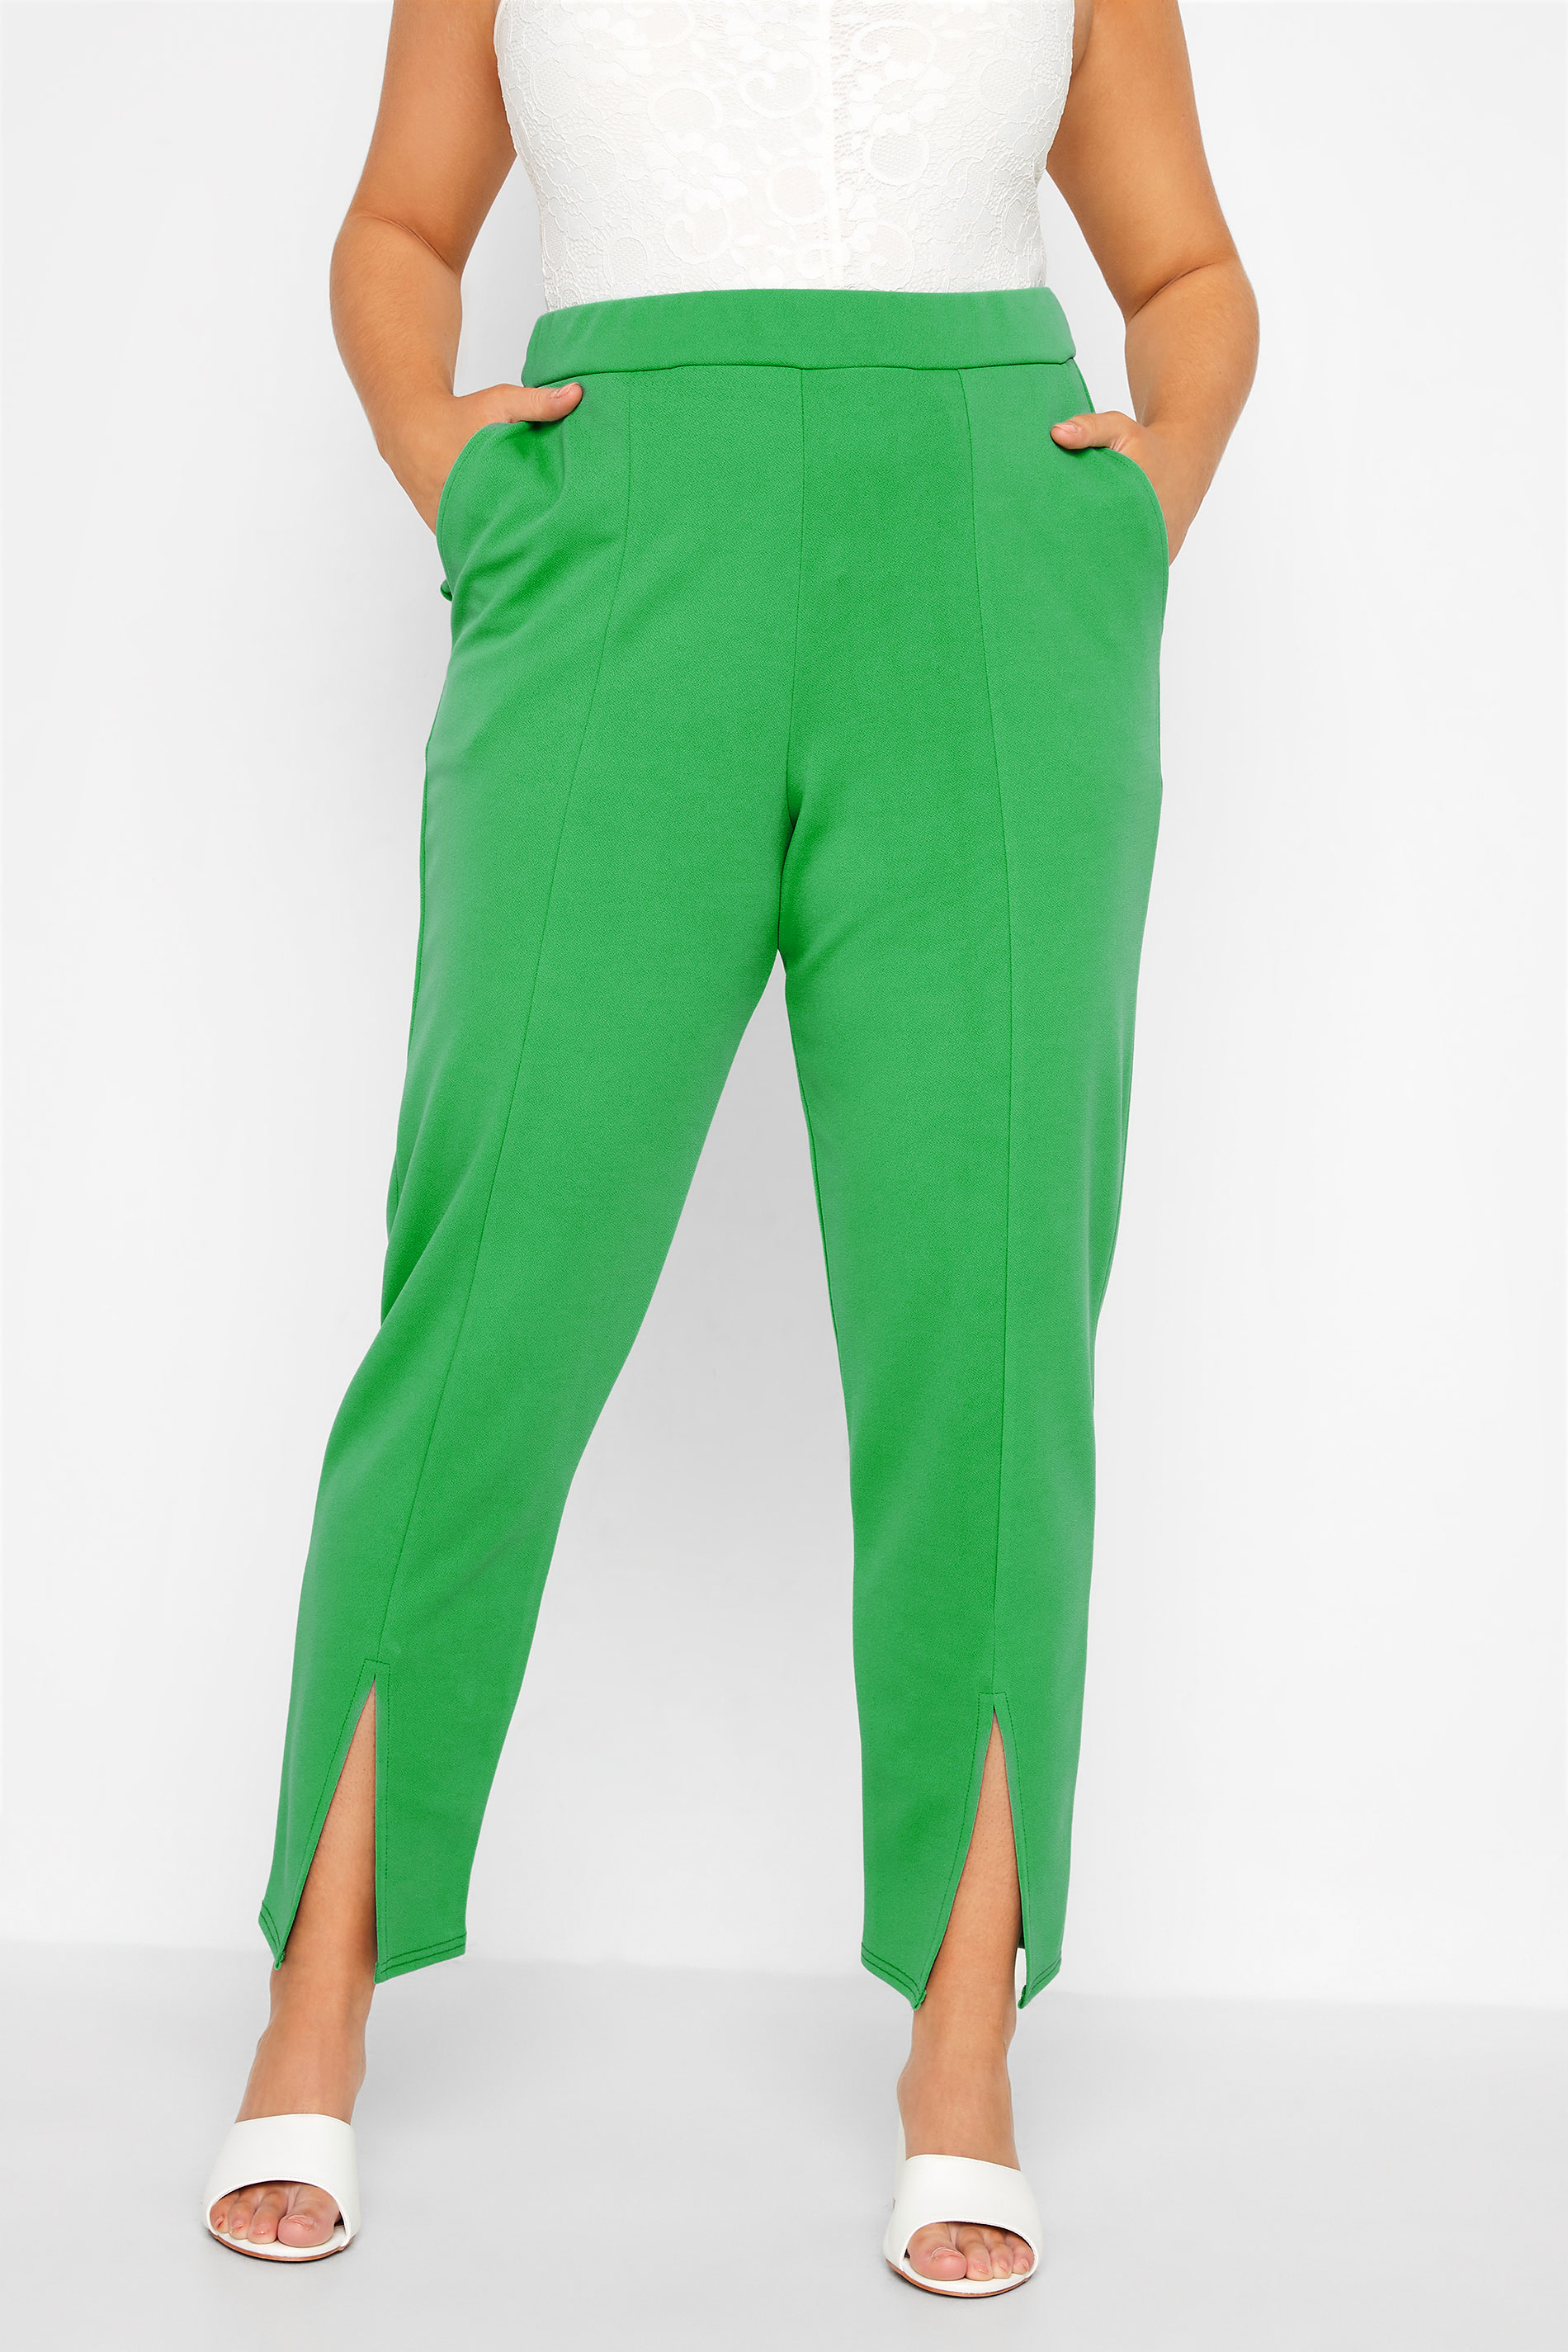 LIMITED COLLECTION Curve Bright Green Split Hem Tapered Trousers_A.jpg